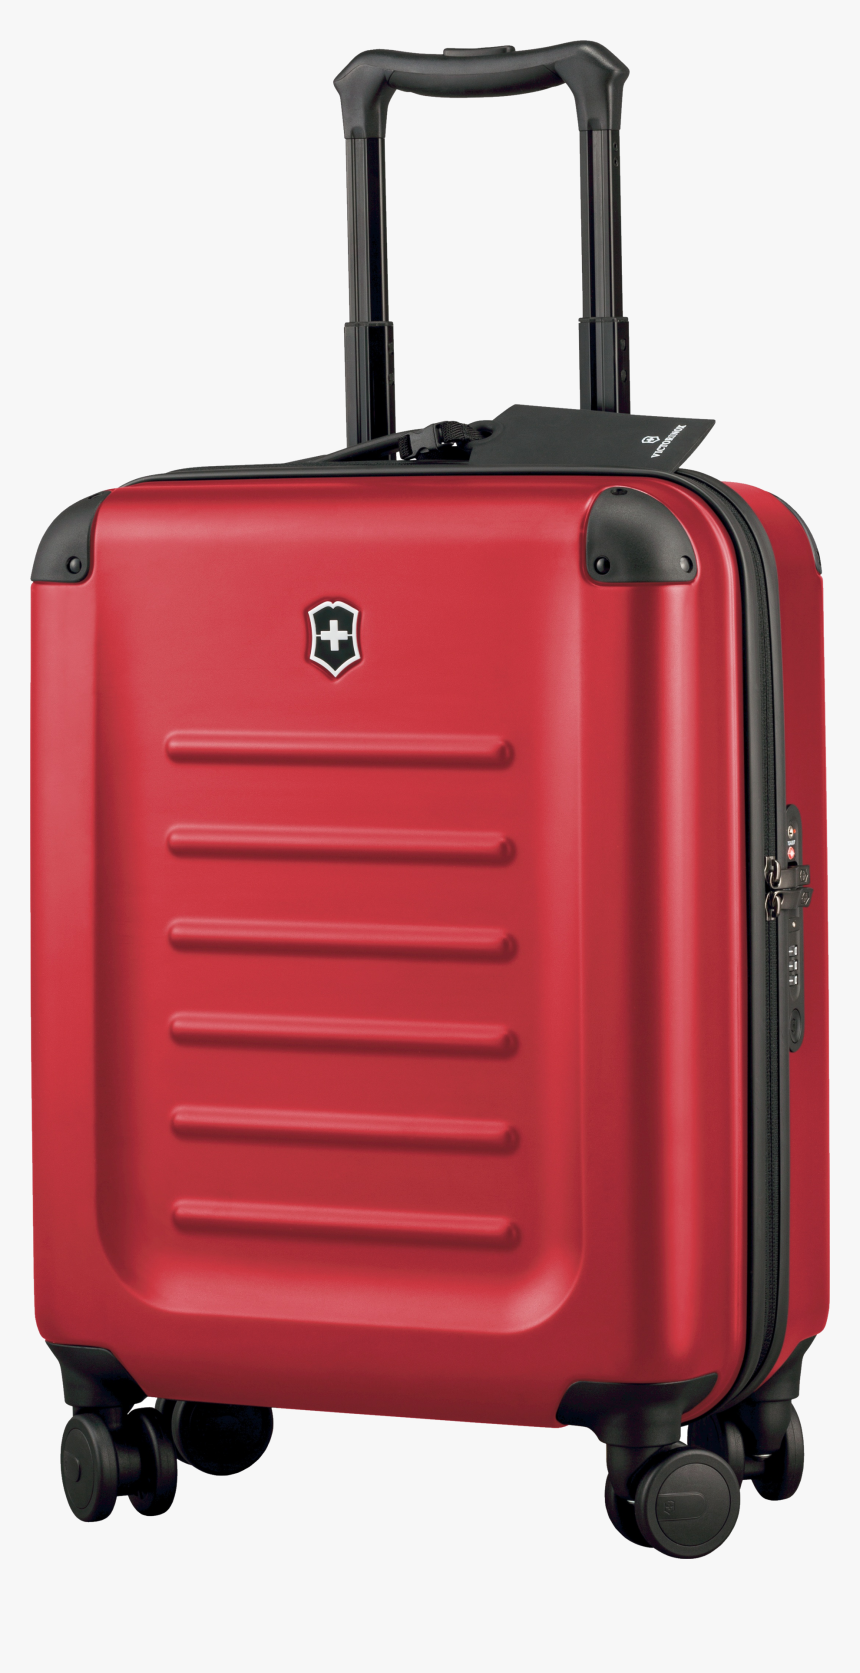 Luggage Png